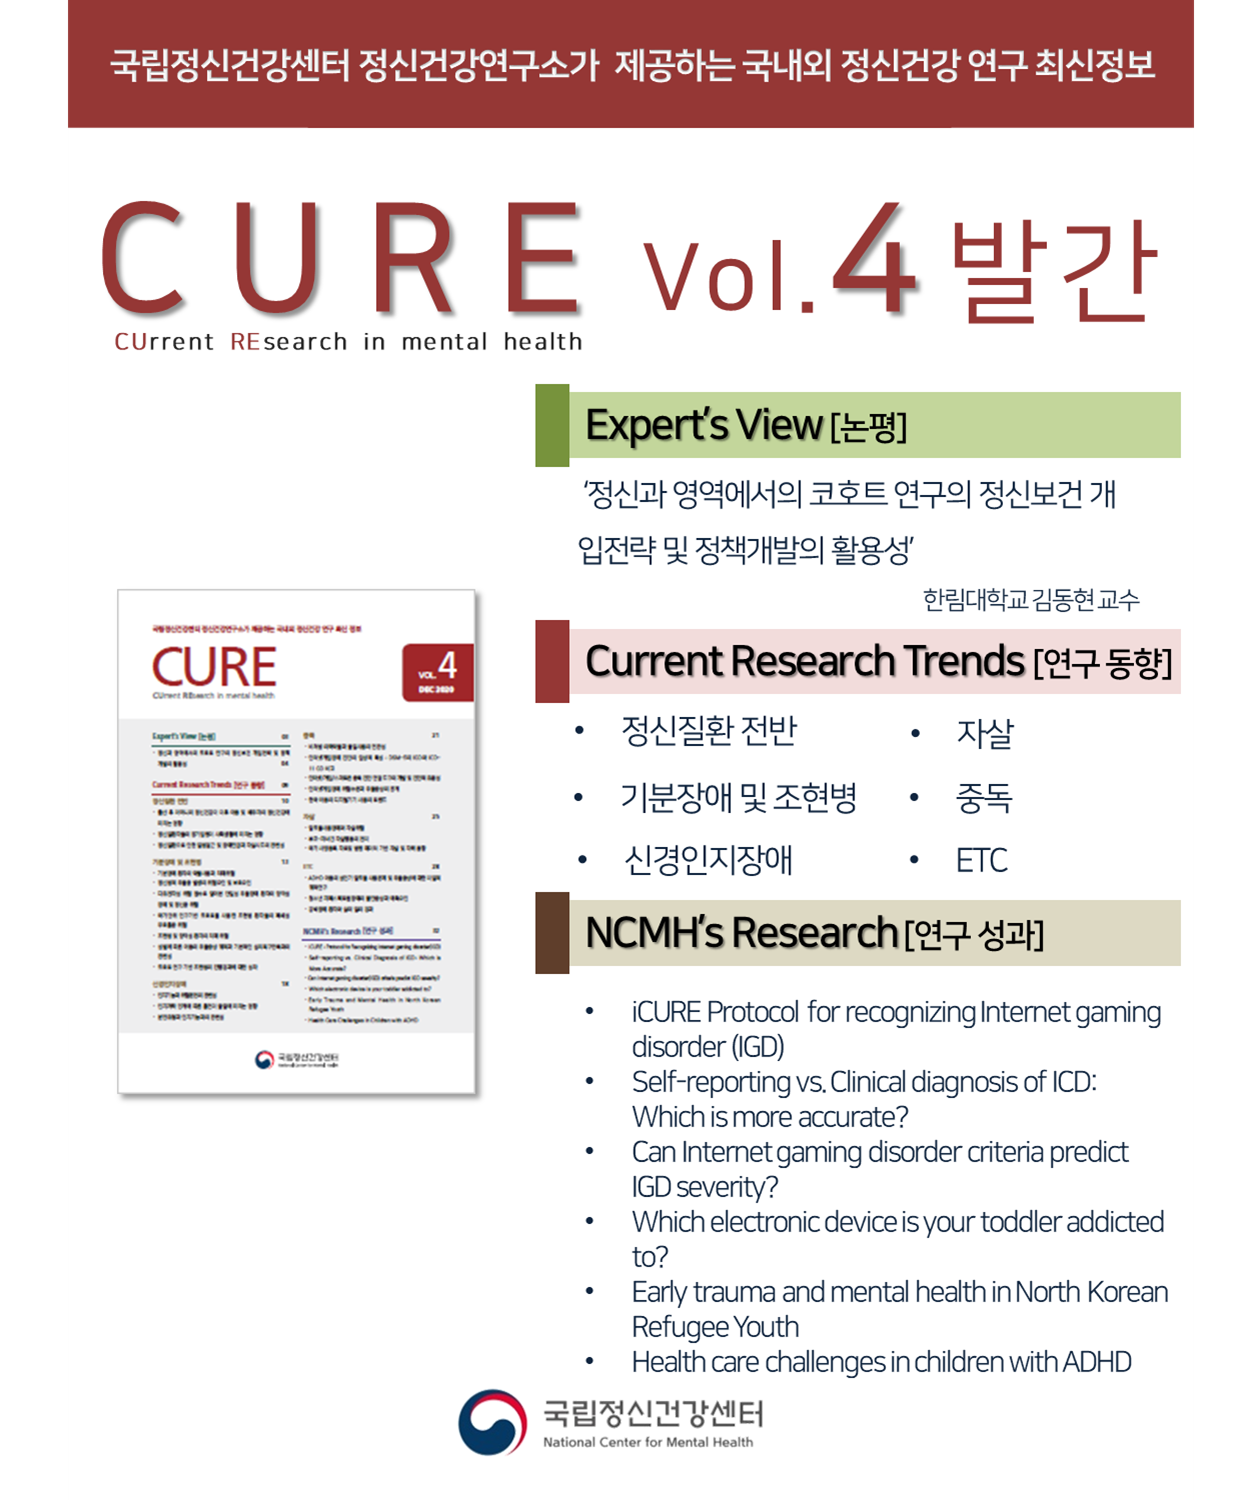 CURE (CUrrent REsearch in mental health) Vol.4 